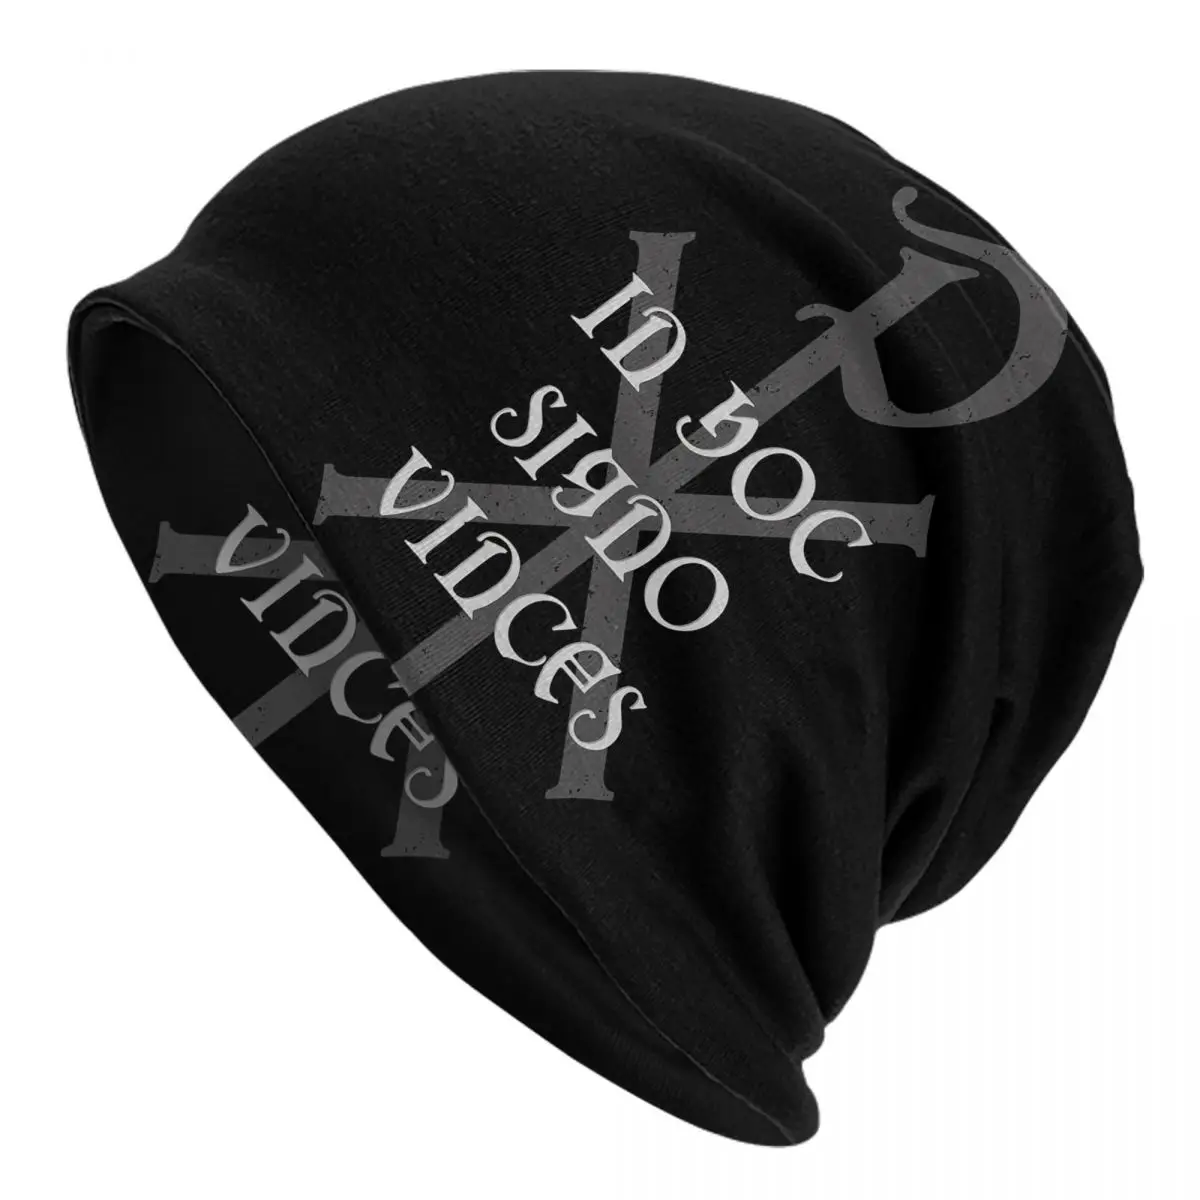 IN HOC SIGNO VINCES Chi Rho Christogram Adult Men's Women's Knit Hat Keep warm winter Funny knitted hat